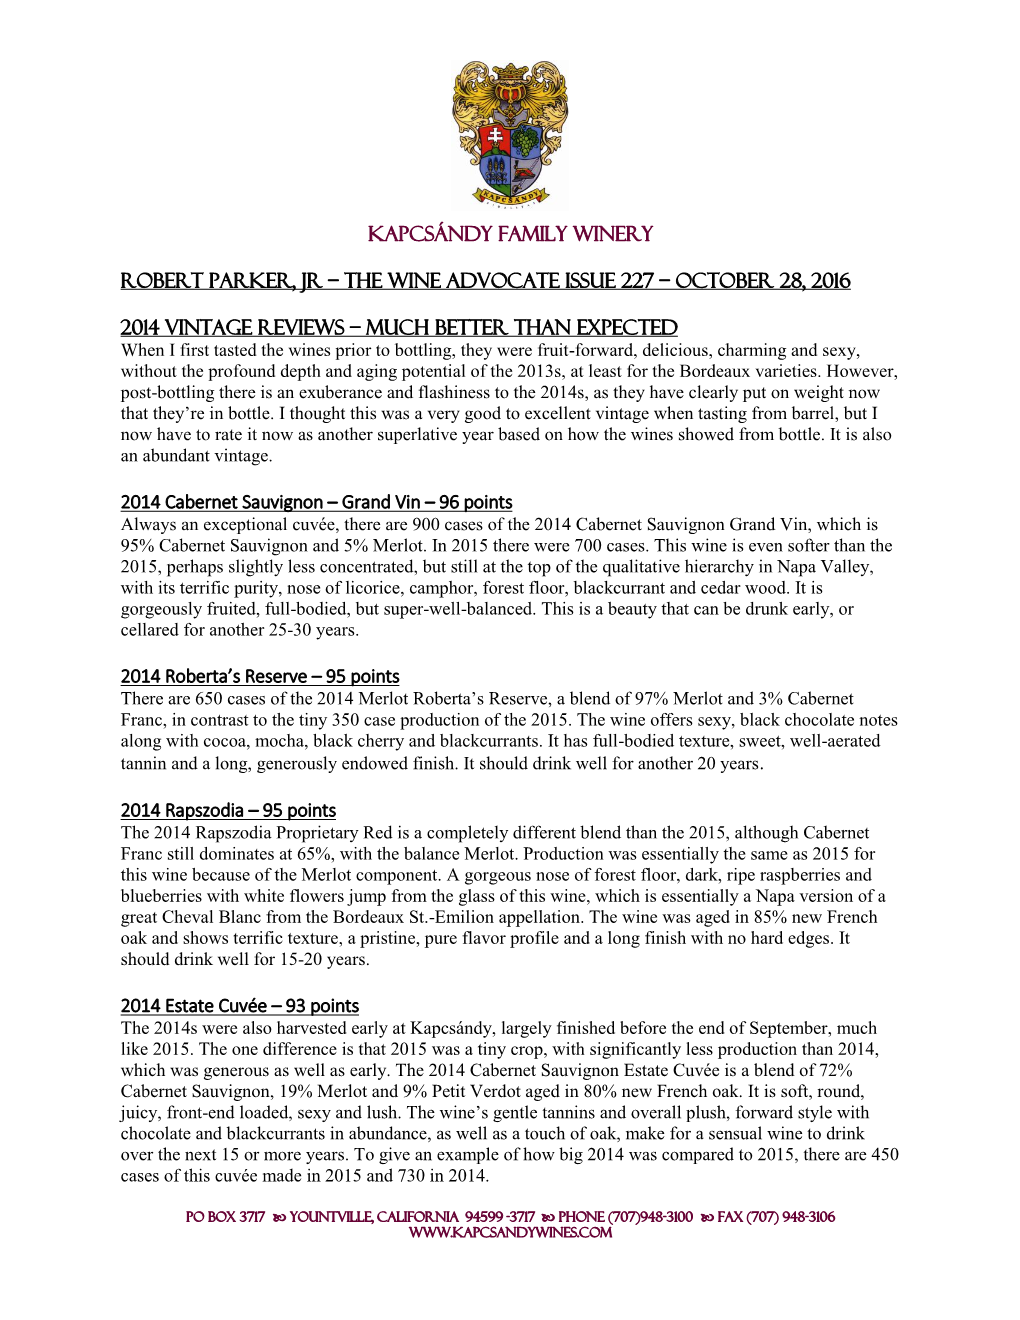 KAPCSÁNDY Family WINERY Robert Parker, Jr – the Wine Advocate Issue 227 – October 28, 2016 2014 Vintage Reviews – Much Be